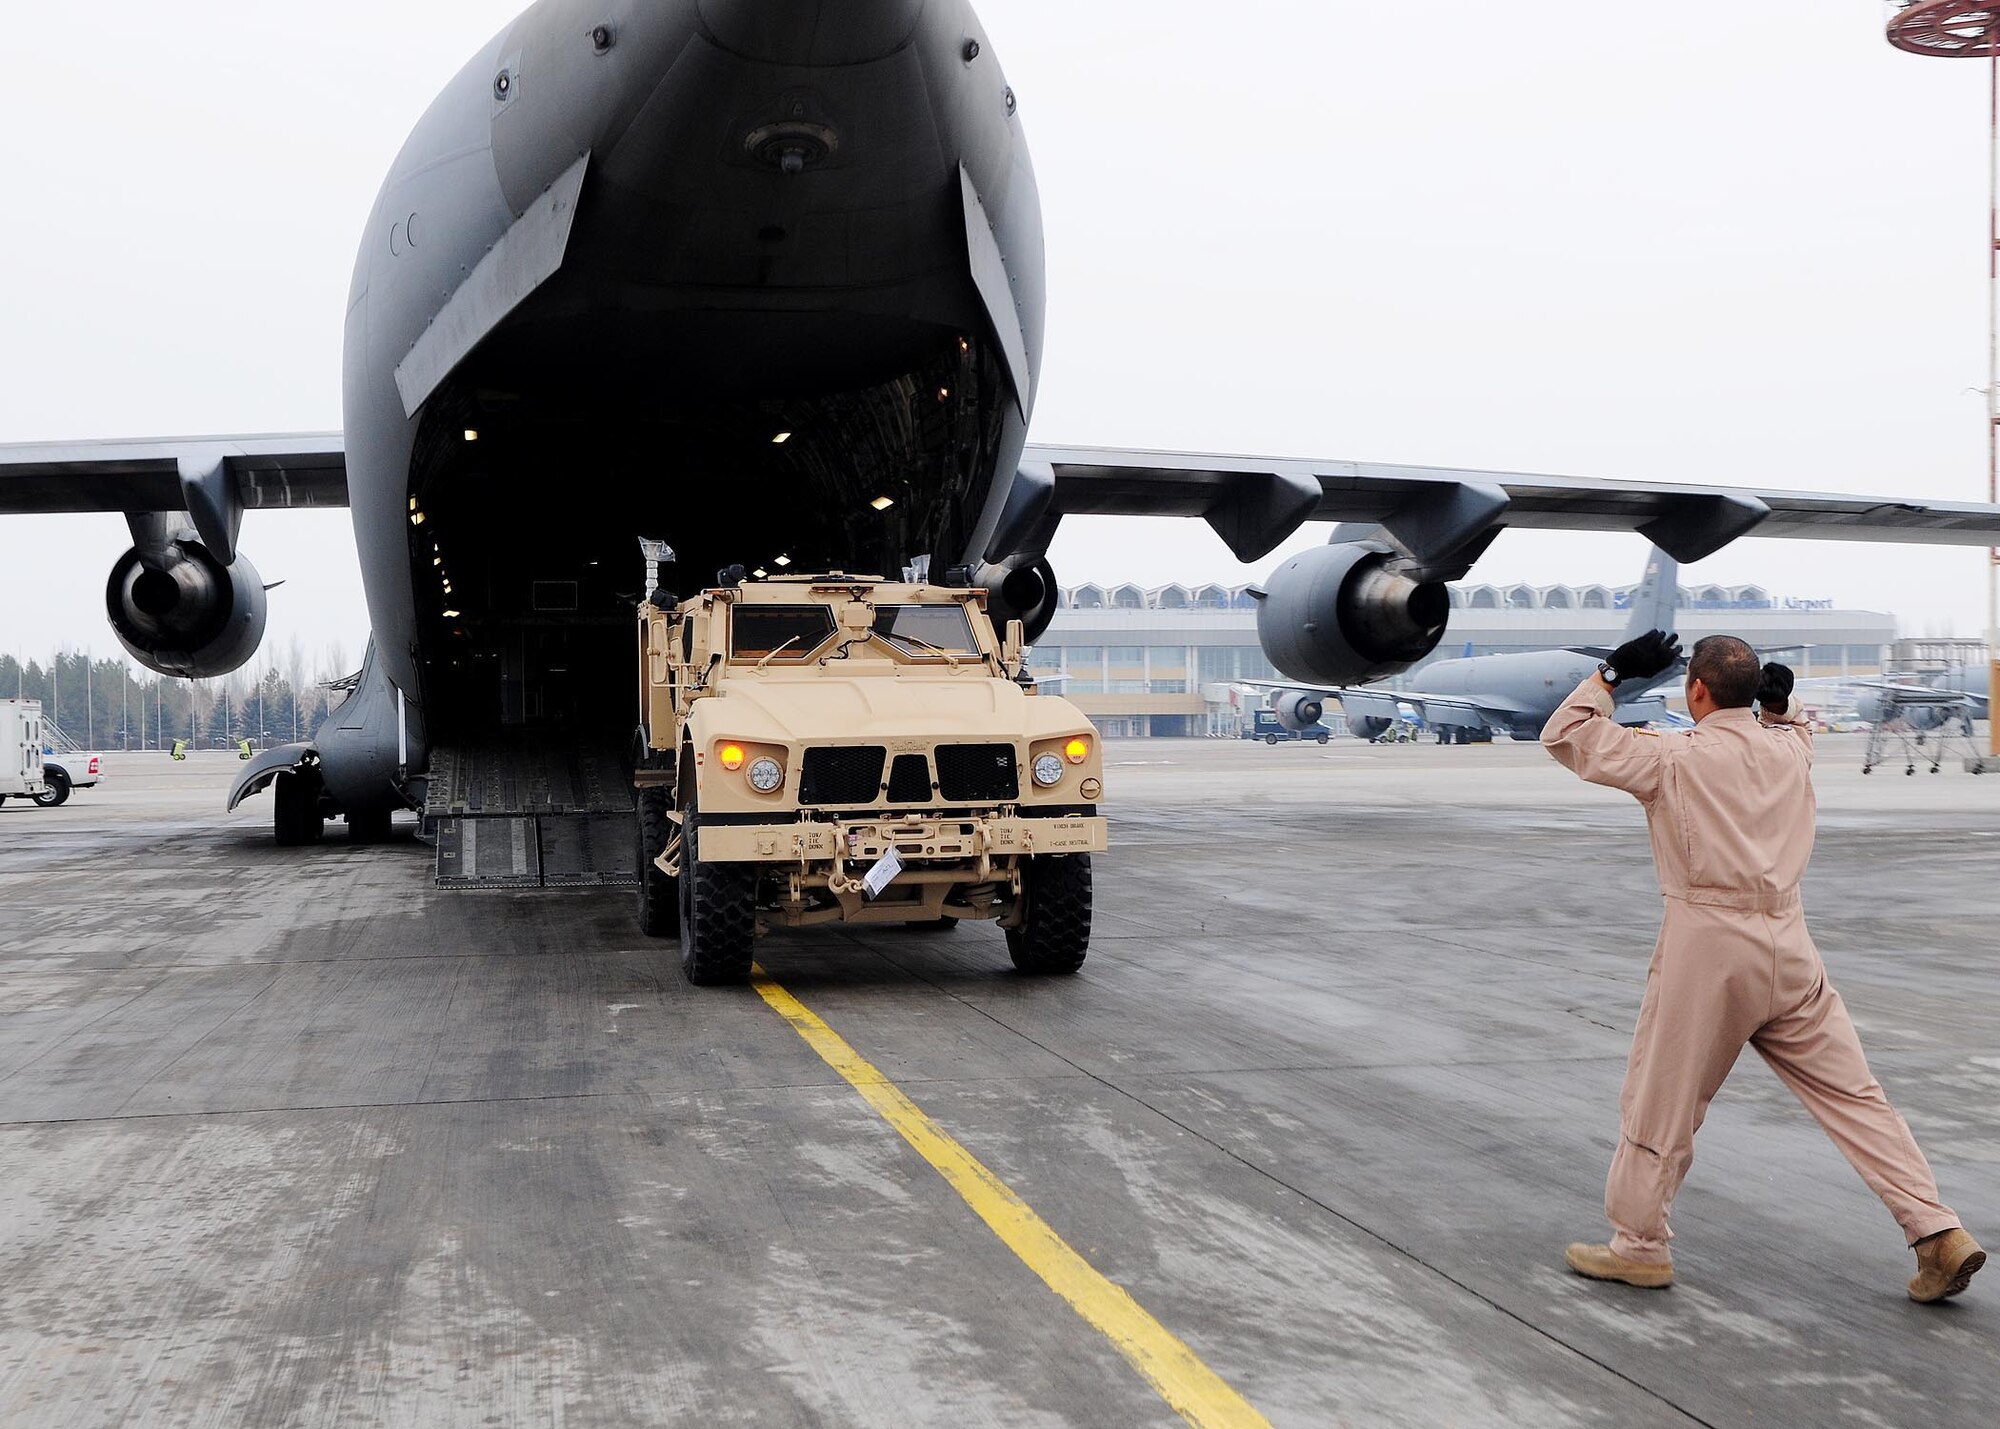 Tech. Sgt. Antonio Munoz, NCOIC and instructor loadmaster from the Transit Center's C-17 detachment, guides an mine-resistant, ambush-protected (MRAP) vehicle into a C-17 Globemaster III prior to shipment to Afghanistan at the Transit Center at Manas, Kyrgyzstan. The new M-ATVs are better equipped to withstand current combat conditions. Several C-17s provide airlift for military servicemembers and cargo. (U.S. Air Force photo by Senior Airman Nichelle Anderson/released)
